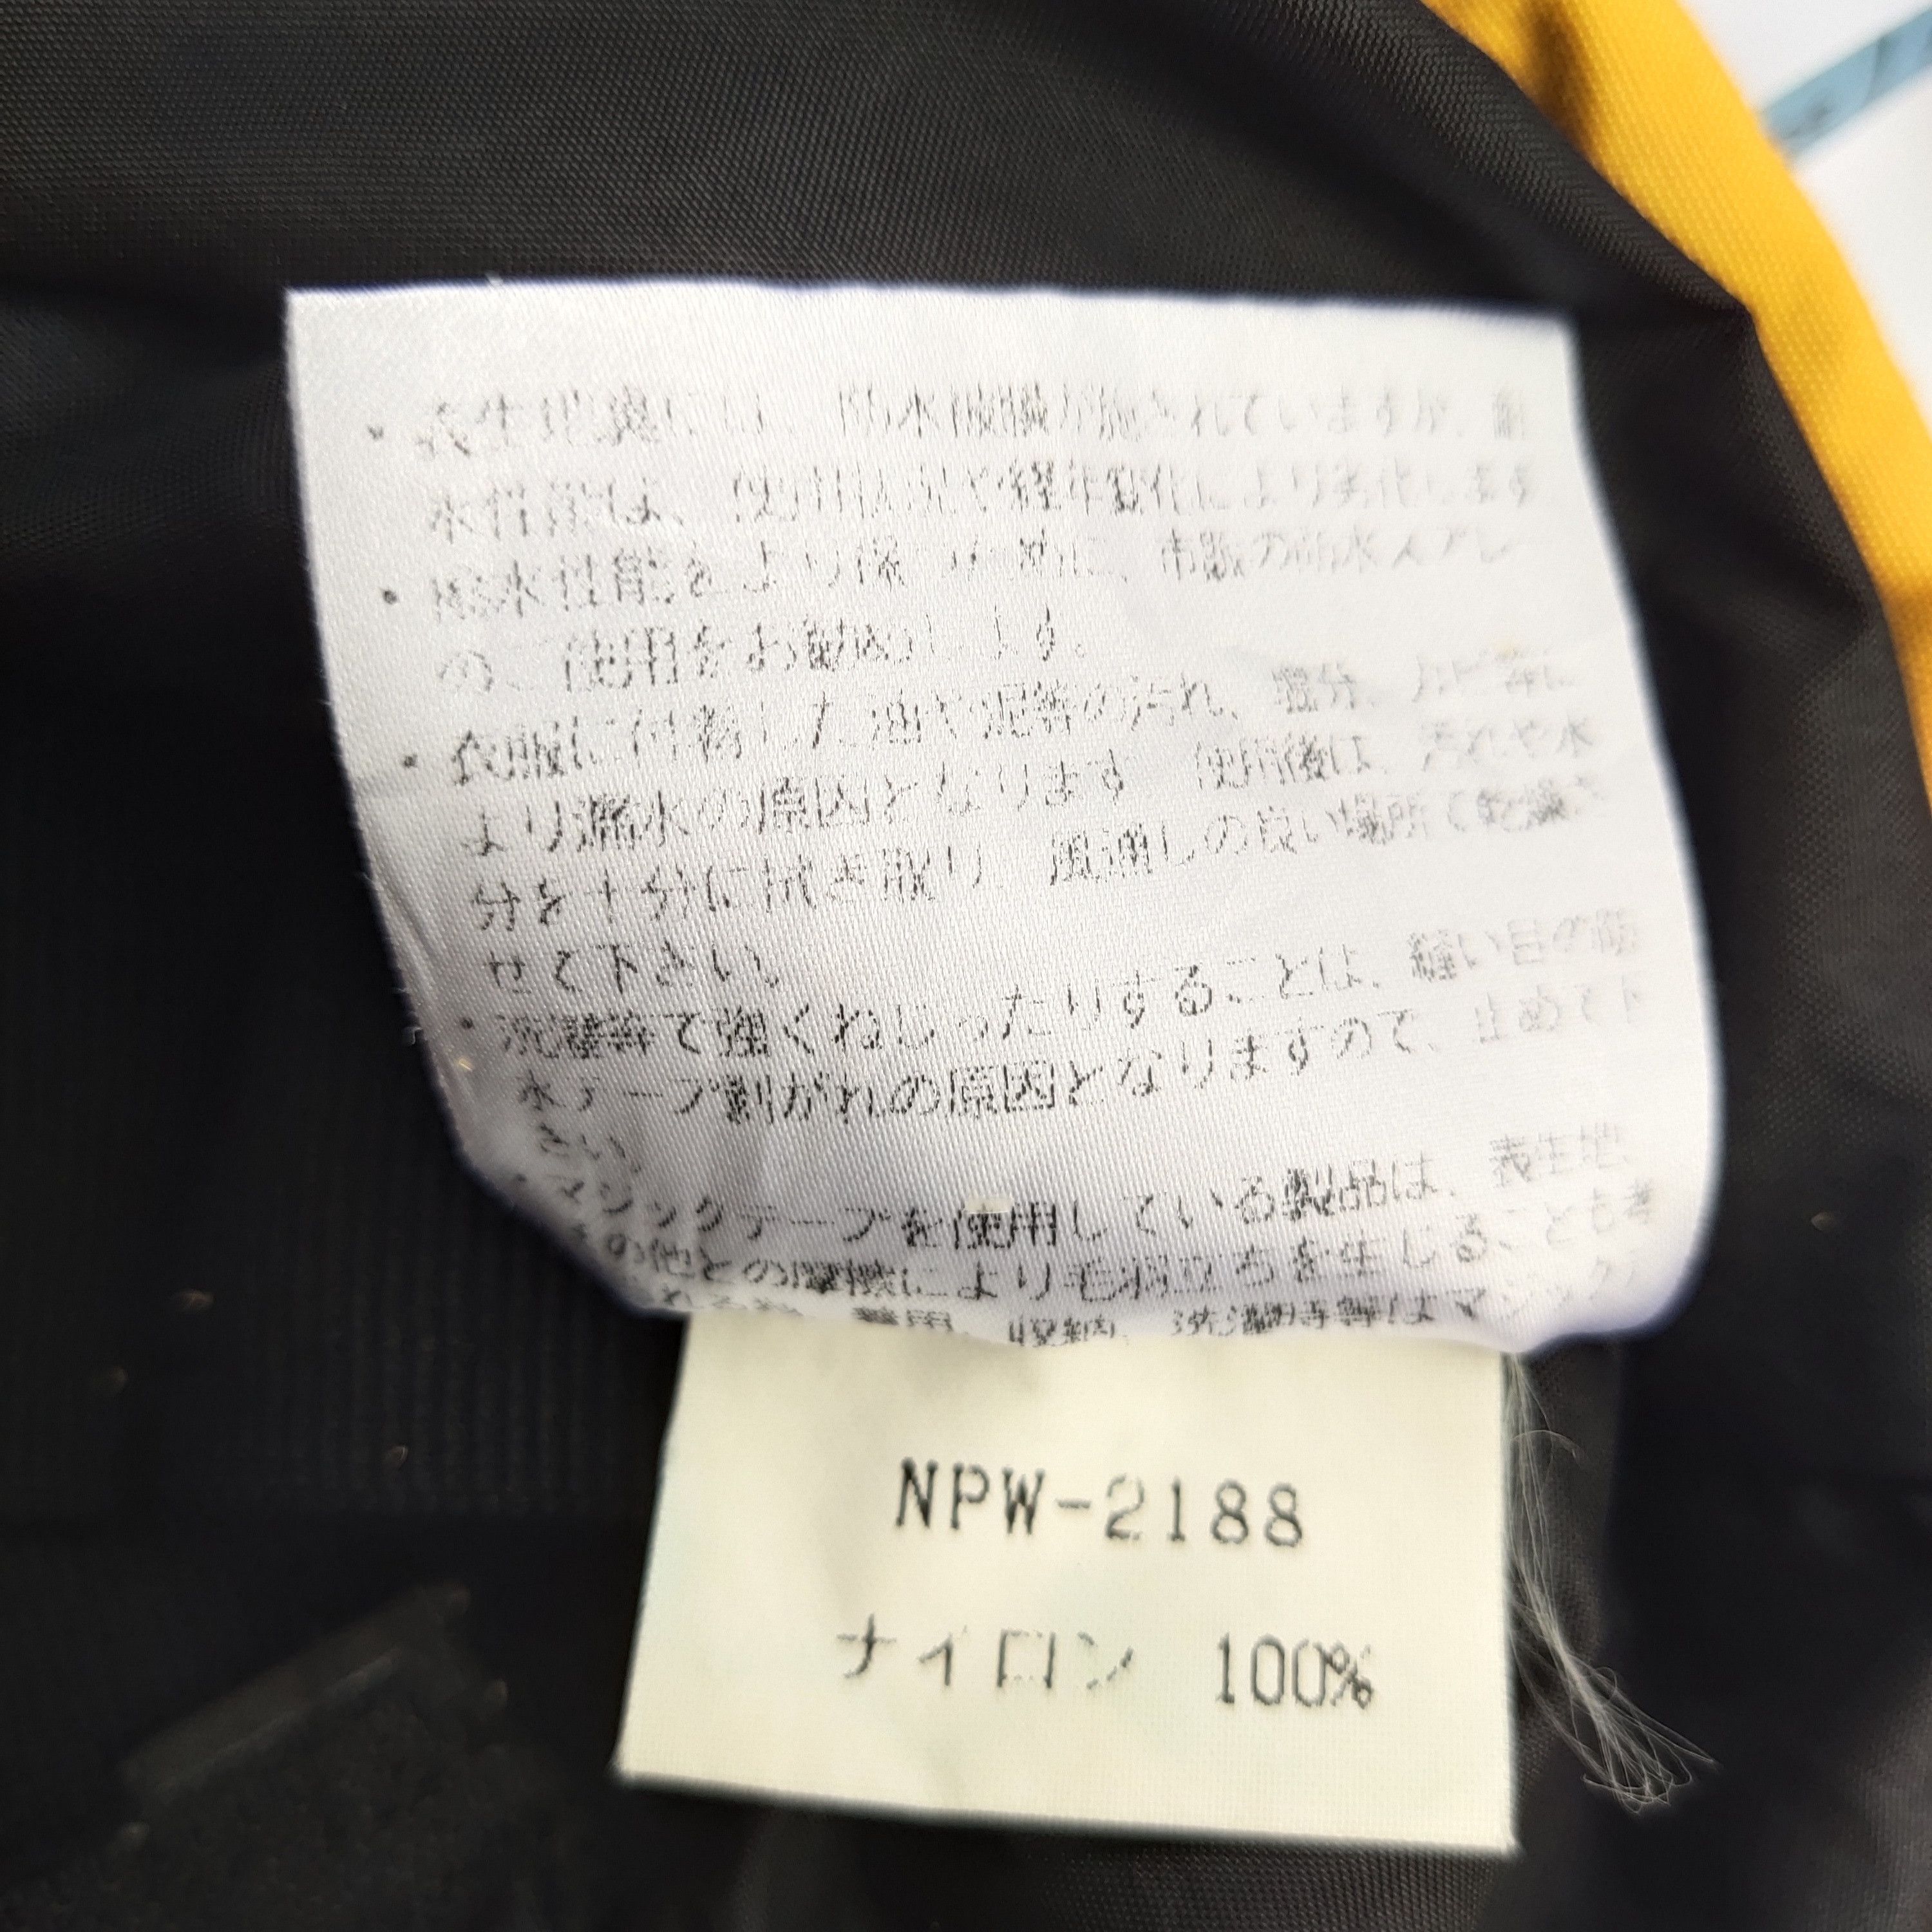 The North Face Vintage North Face Gore-Tex Yellow Jacket Size US M / EU 48-50 / 2 - 8 Thumbnail